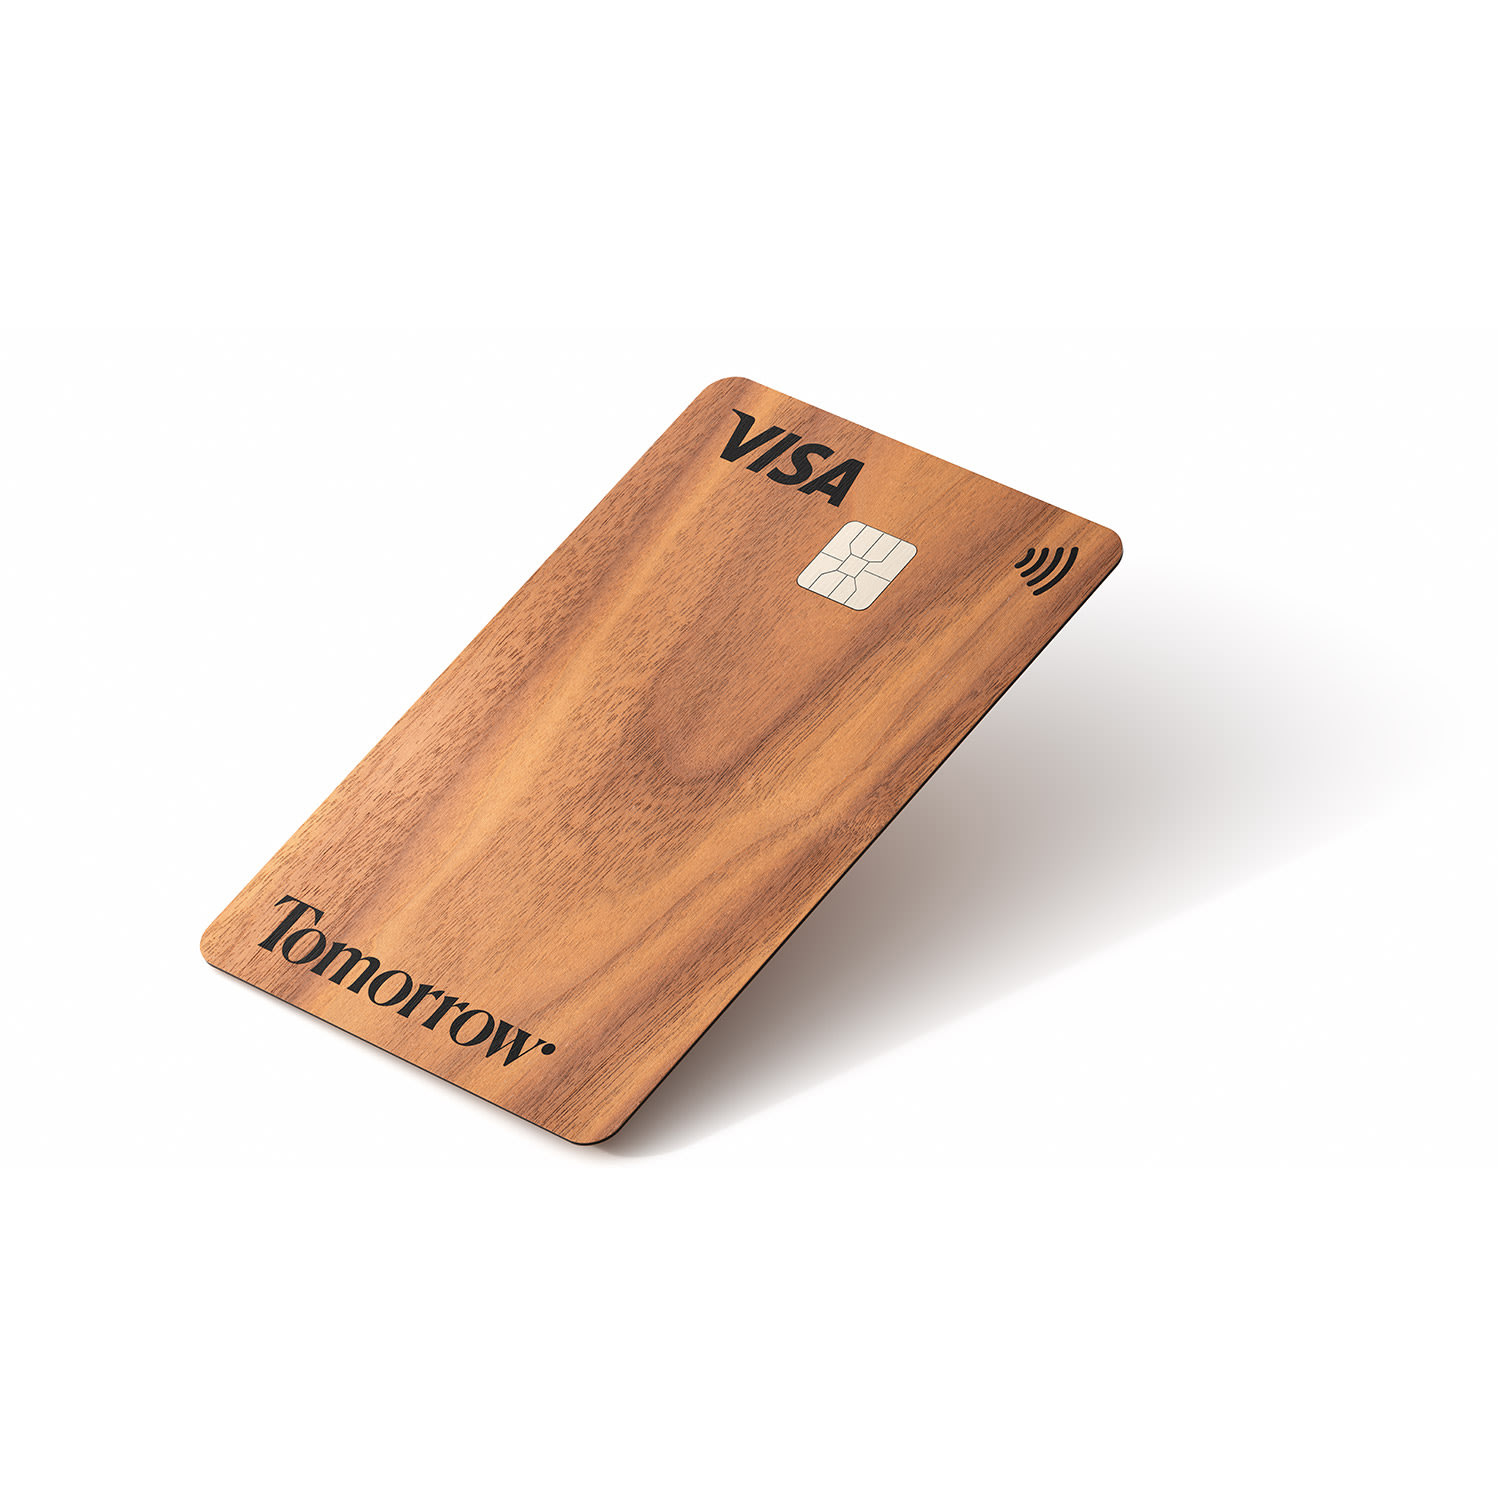 The Tomorrow Wood deposit card made out of cherry wood